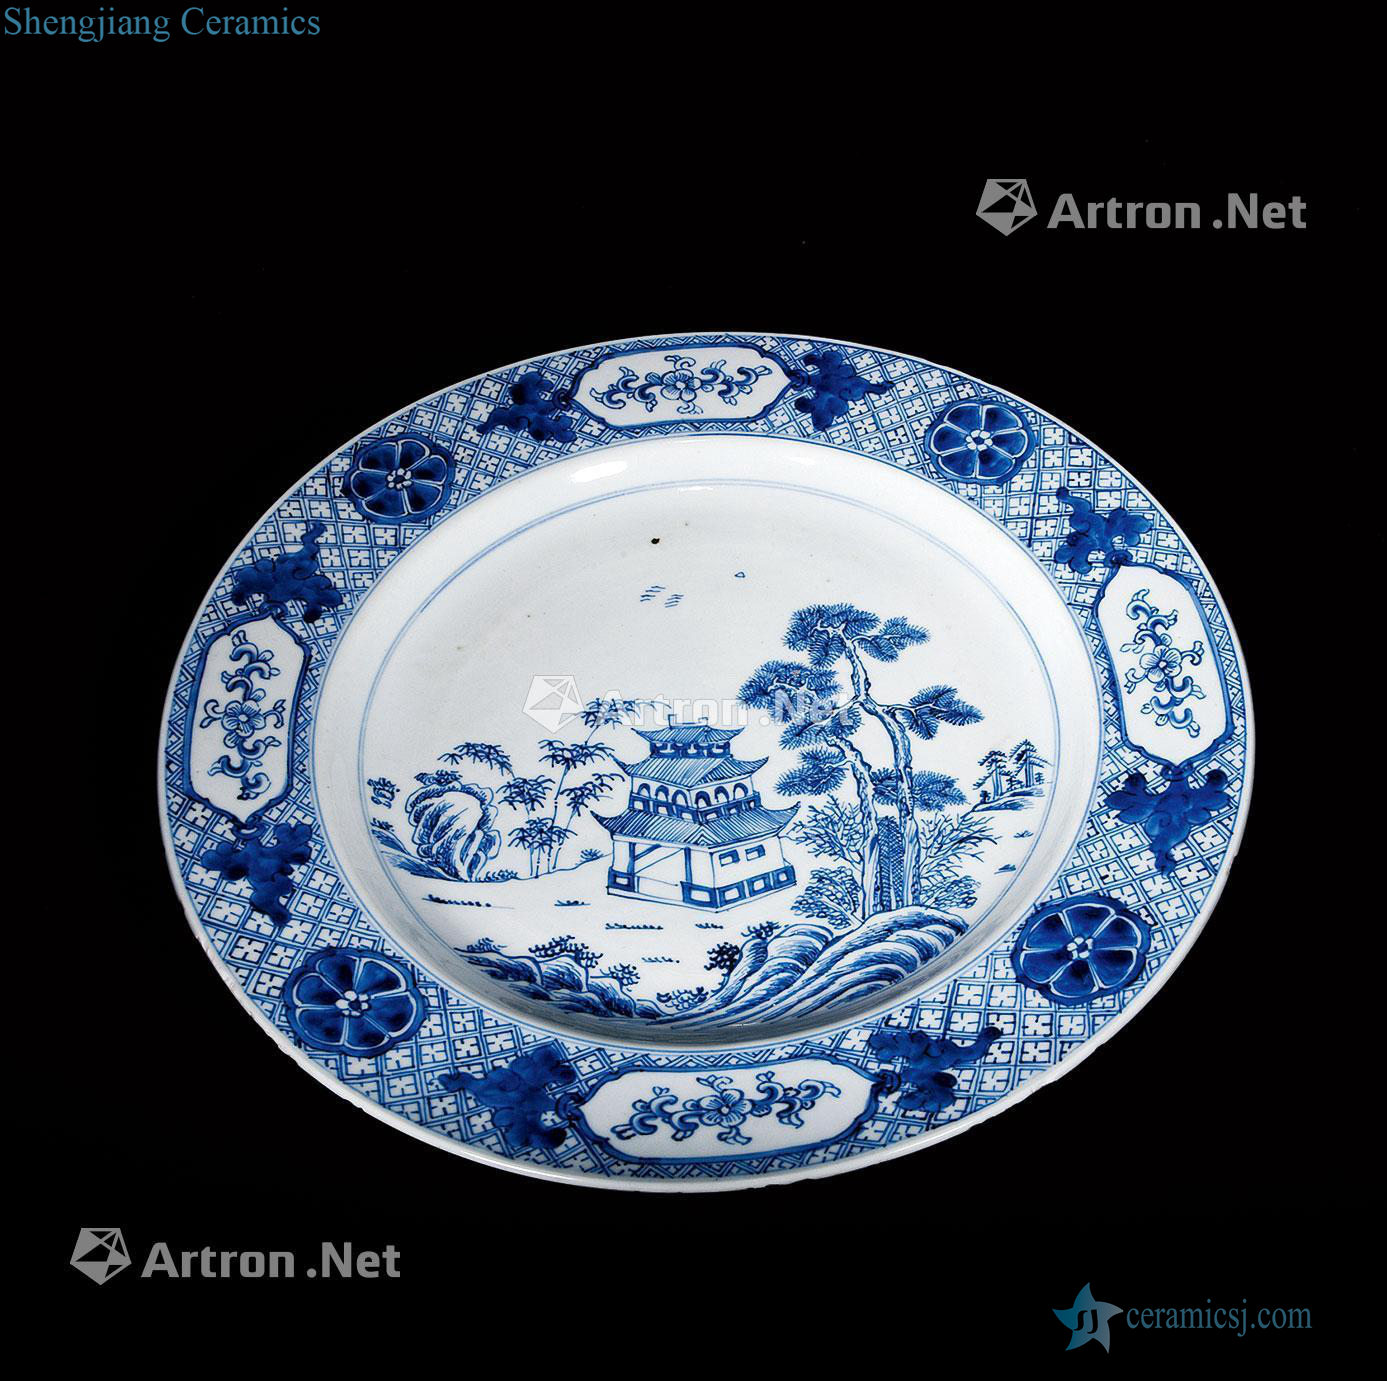 The qing emperor kangxi Blue and white, poetic